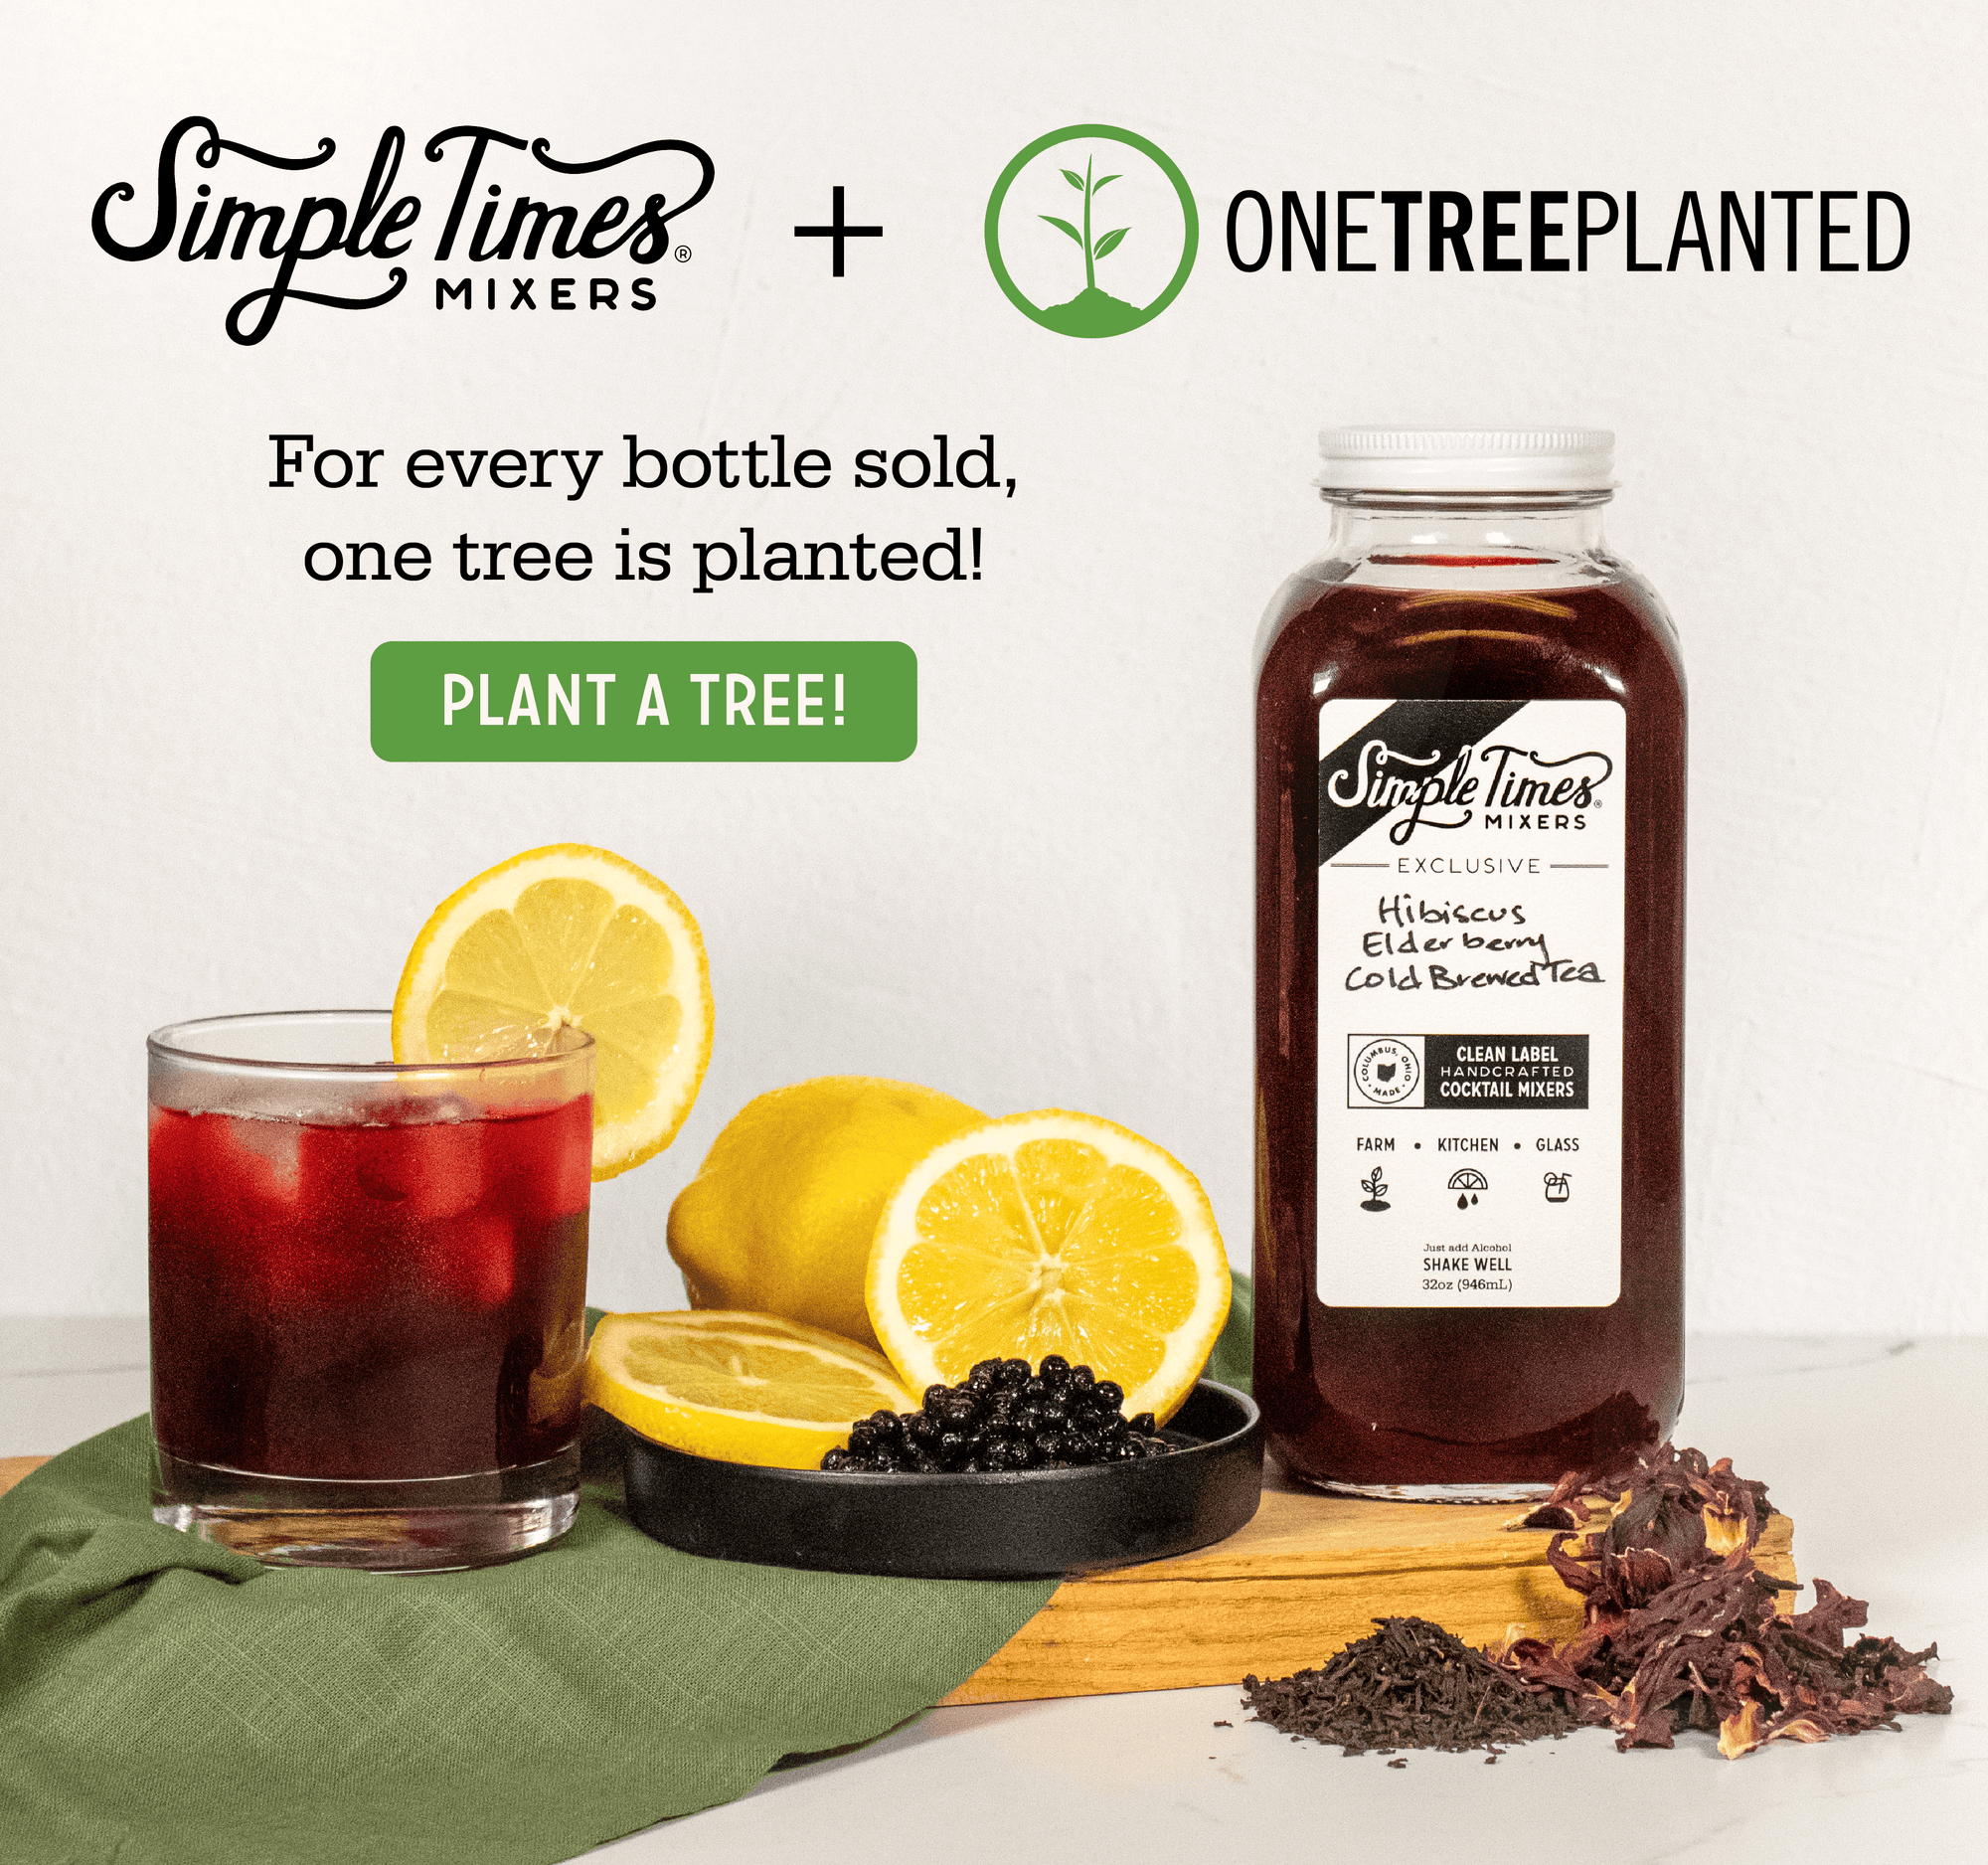 We have teamed up with One Tree Planted for the month of April. For every one bottle sold of our Hibiscus Elderberry Cold-Brewed Tea, we will plant one tree! 